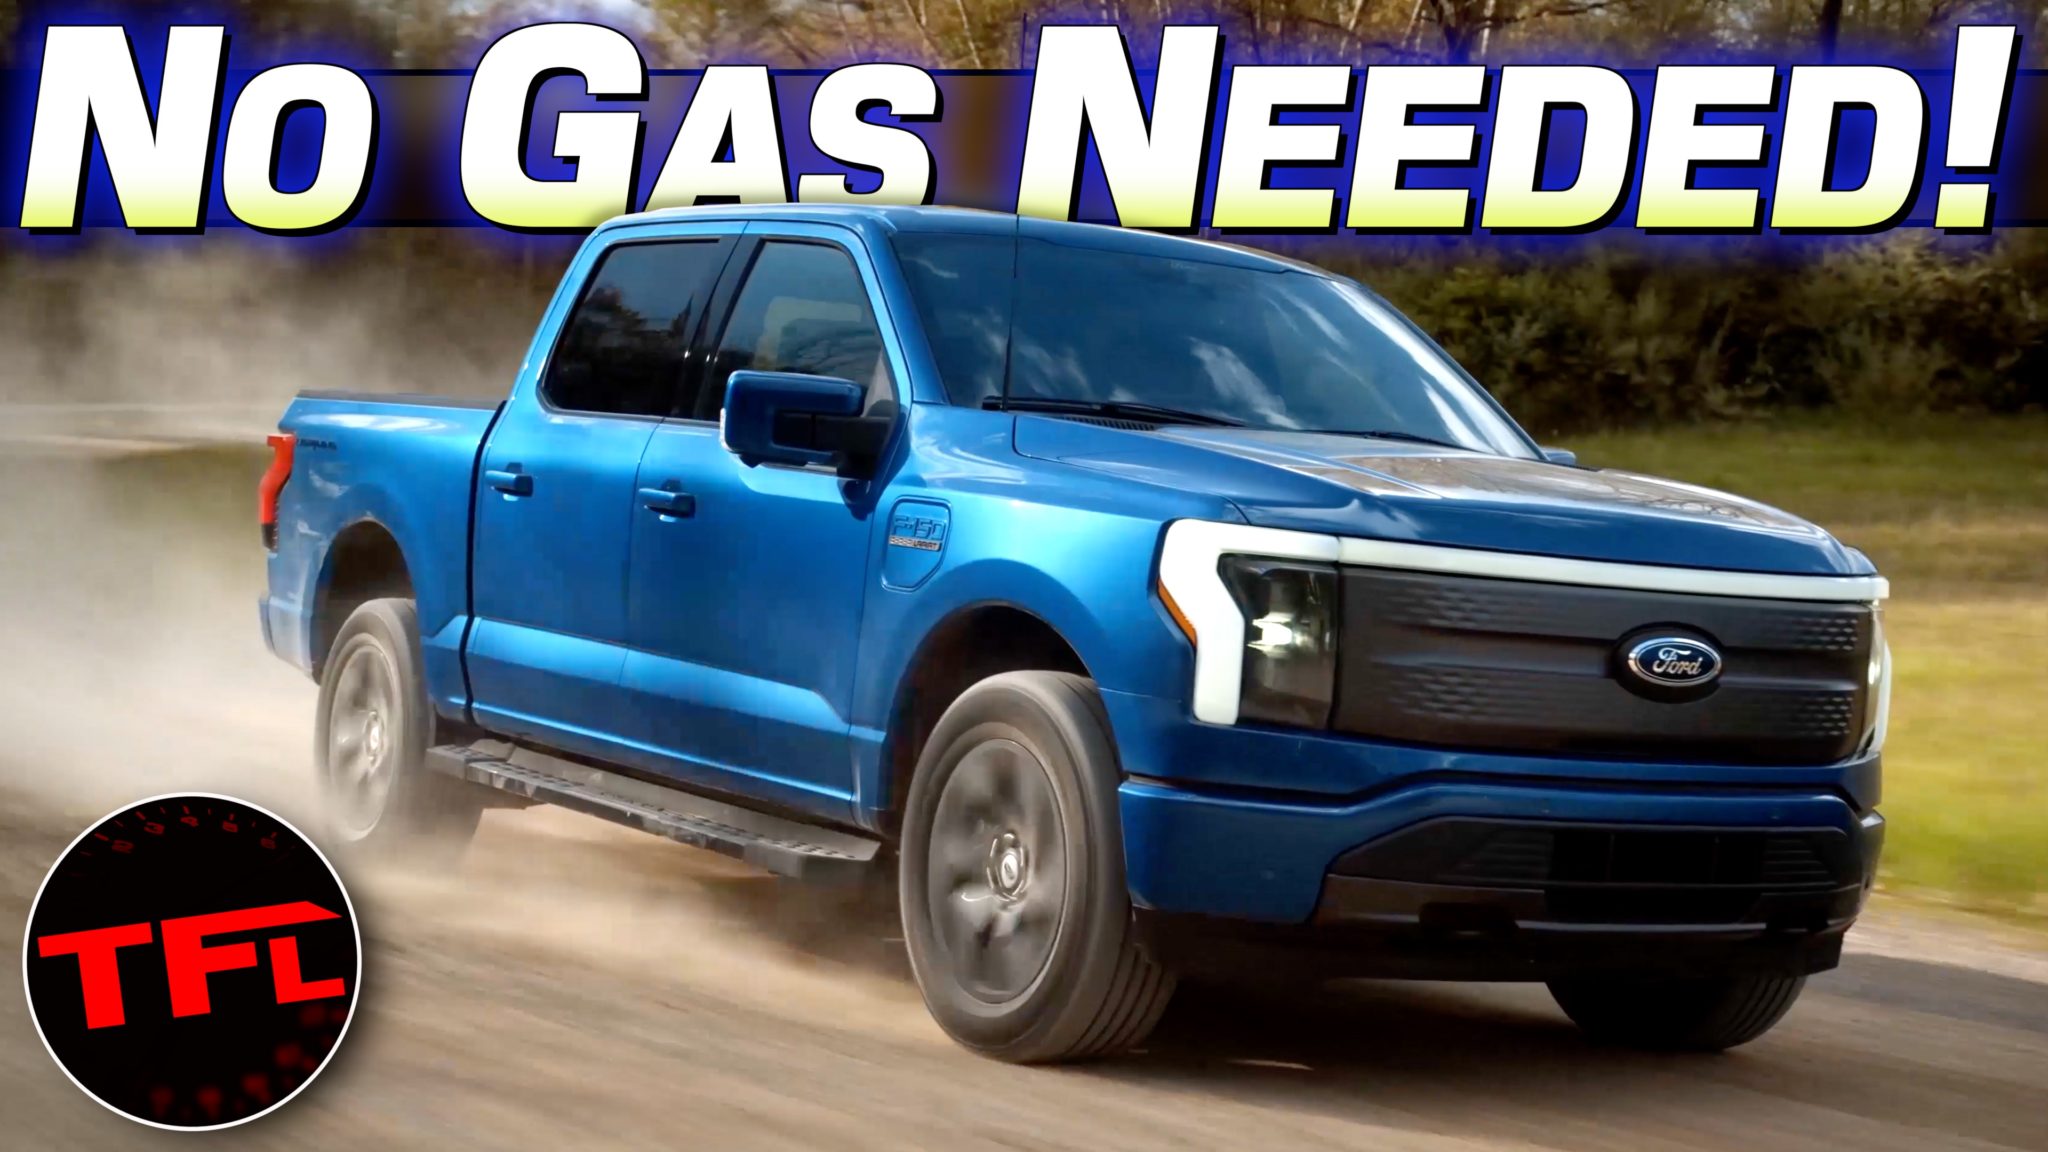 Video Debut The Electric Ford F Lightning Truck Shocks The World With A Low Price The